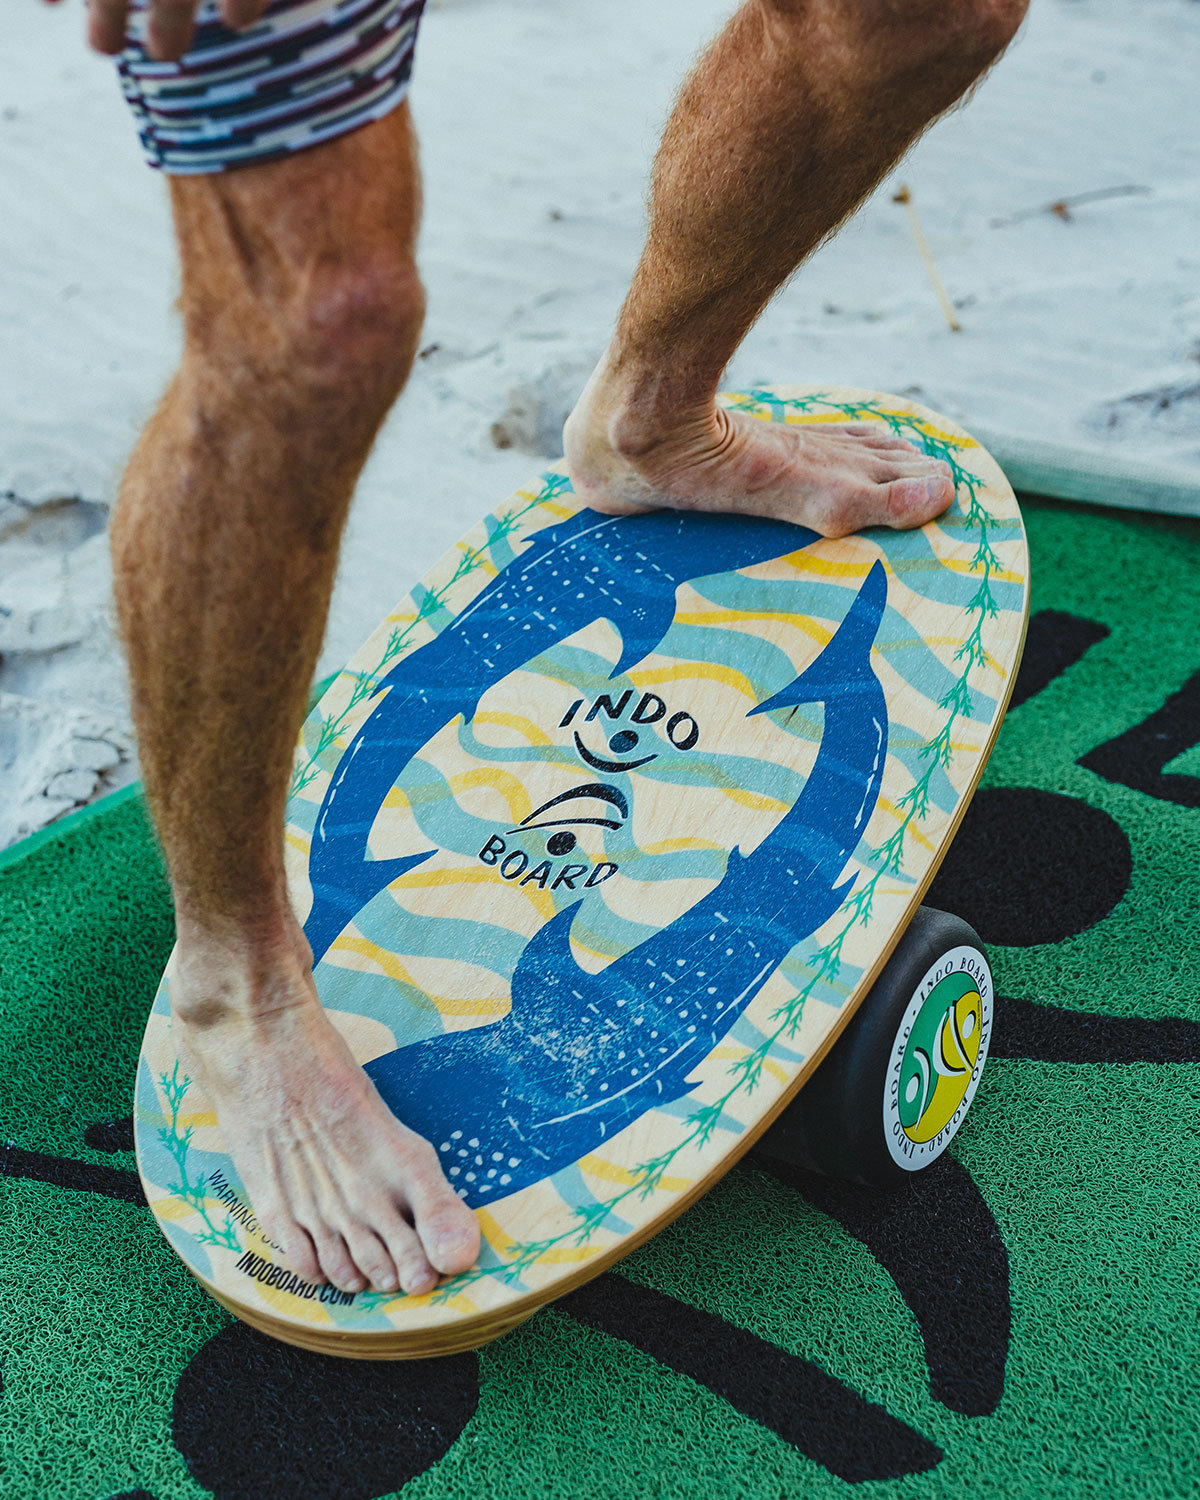 How To Ride an INDO BOARD - Getting Started on Your Balance Board